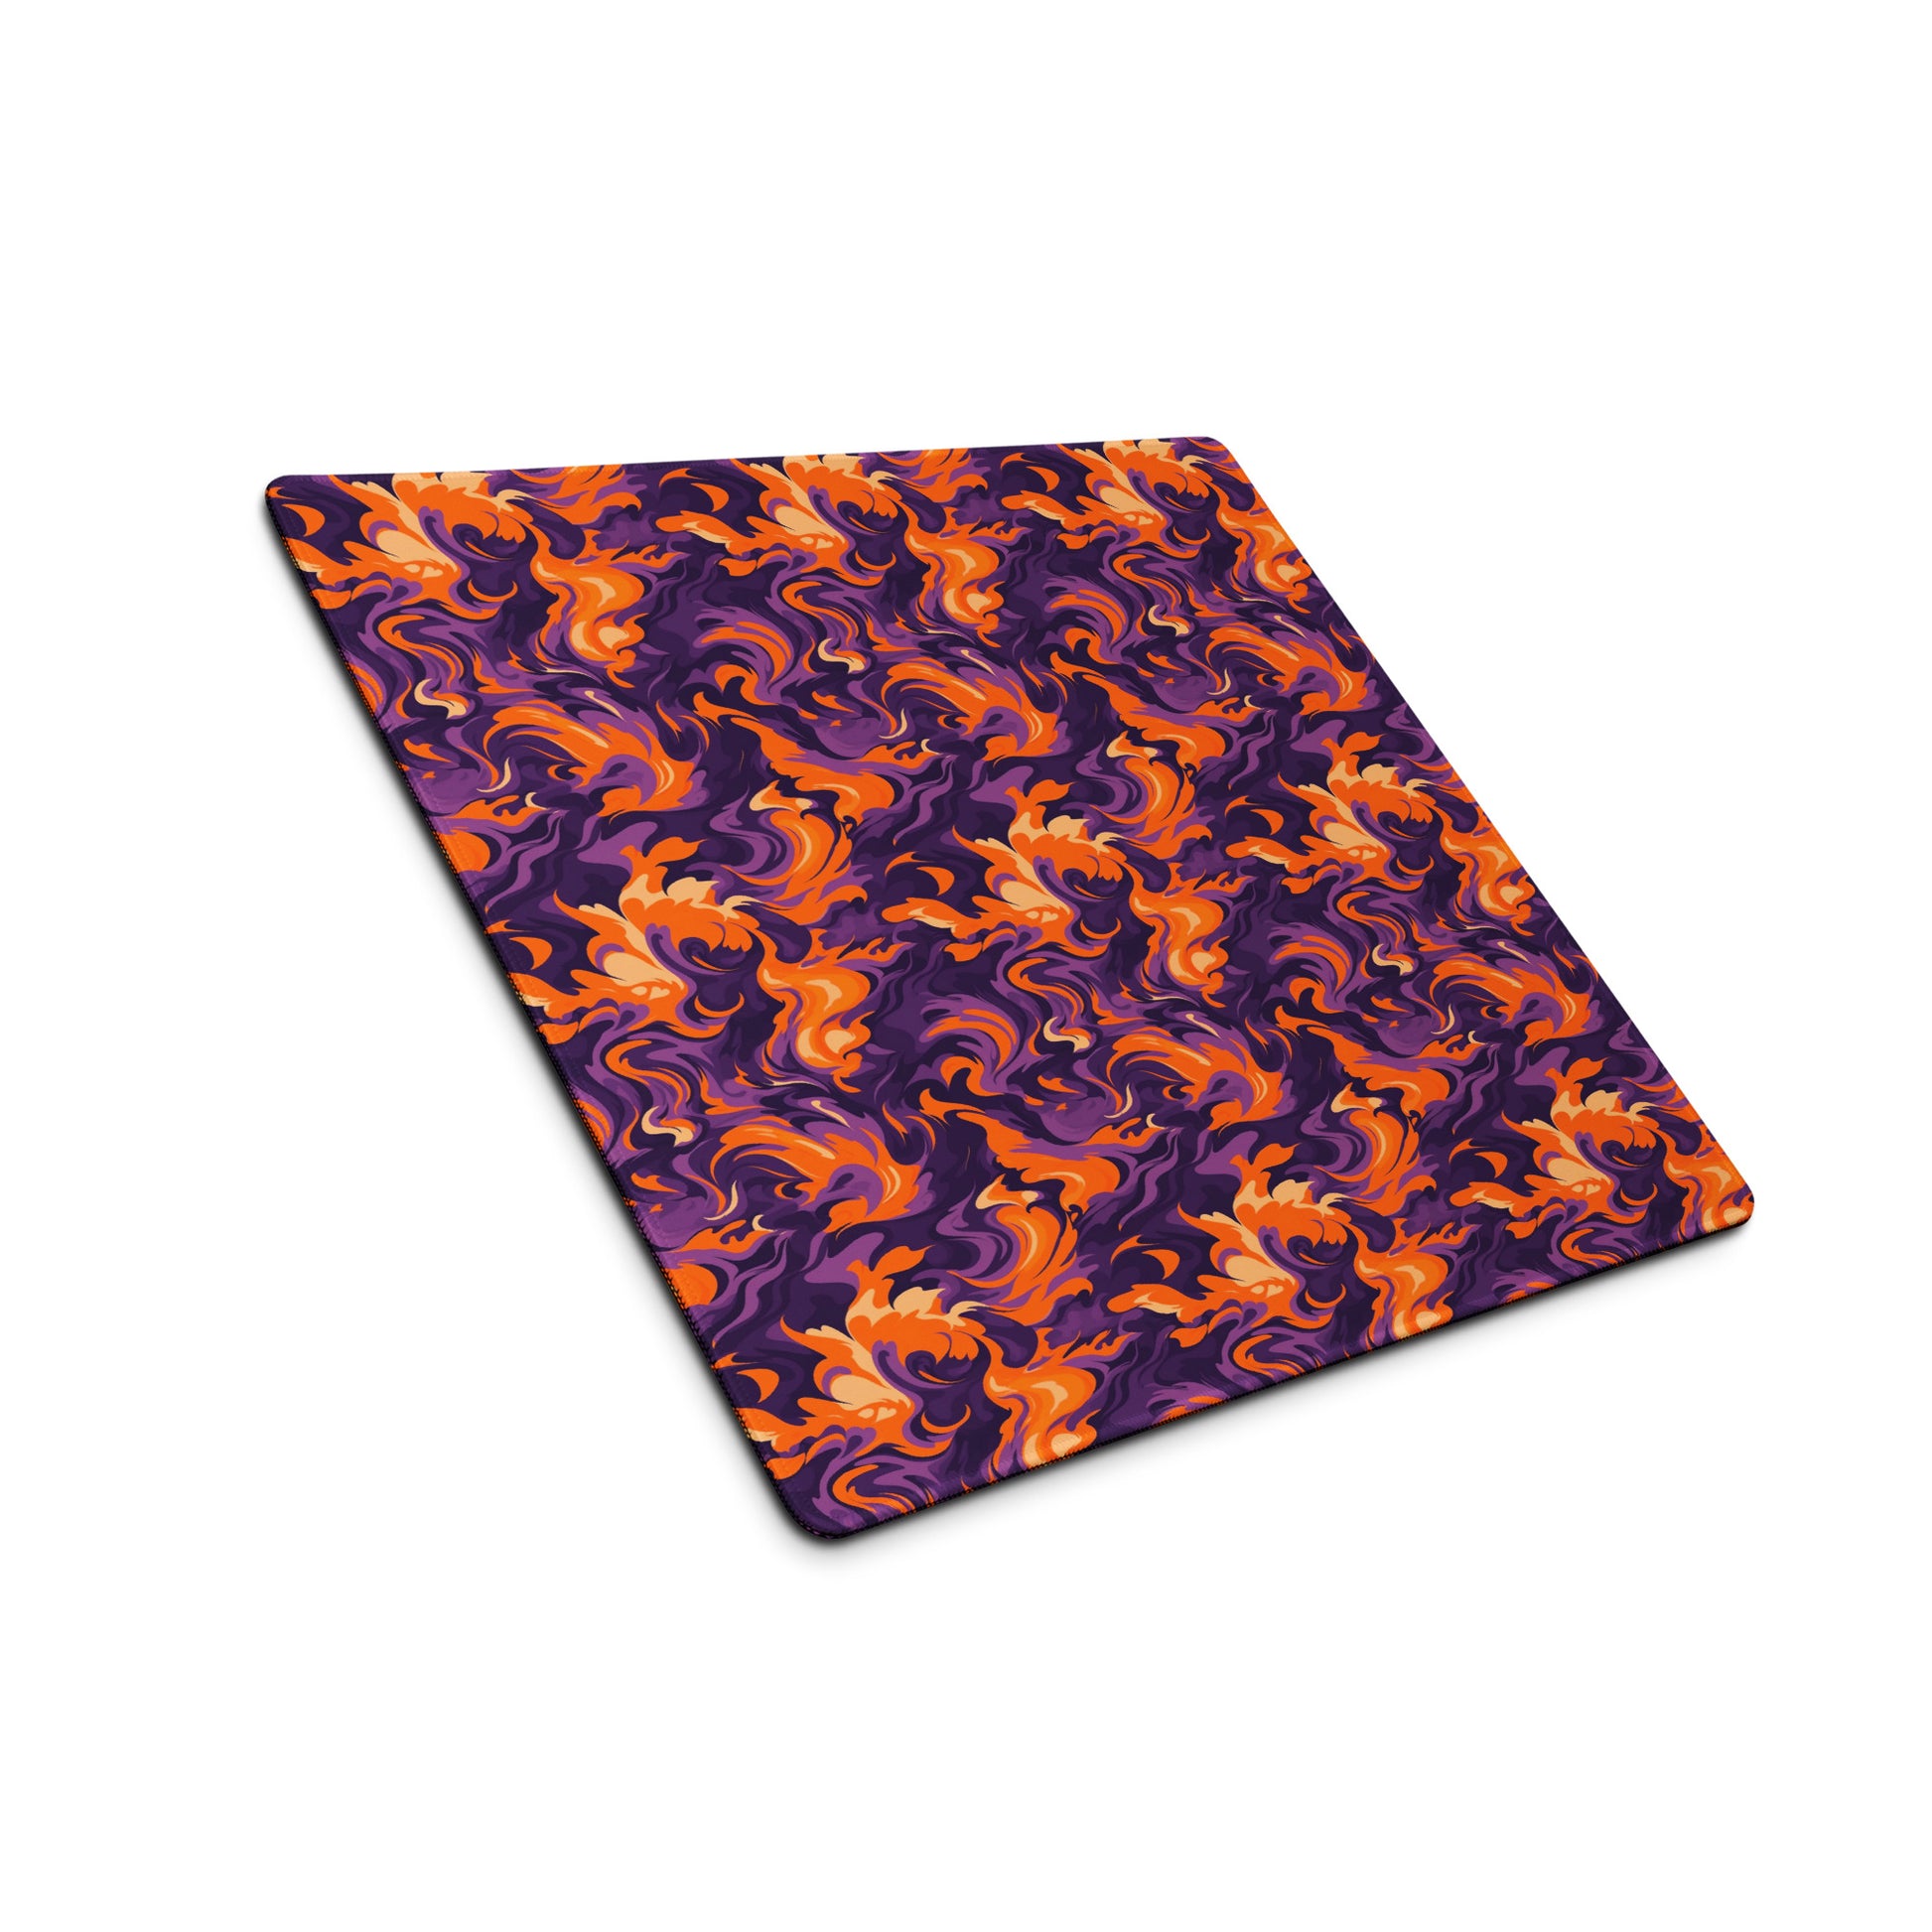 A 18" x 16" desk pad with a purple and orange camo pattern sitting at an angle.